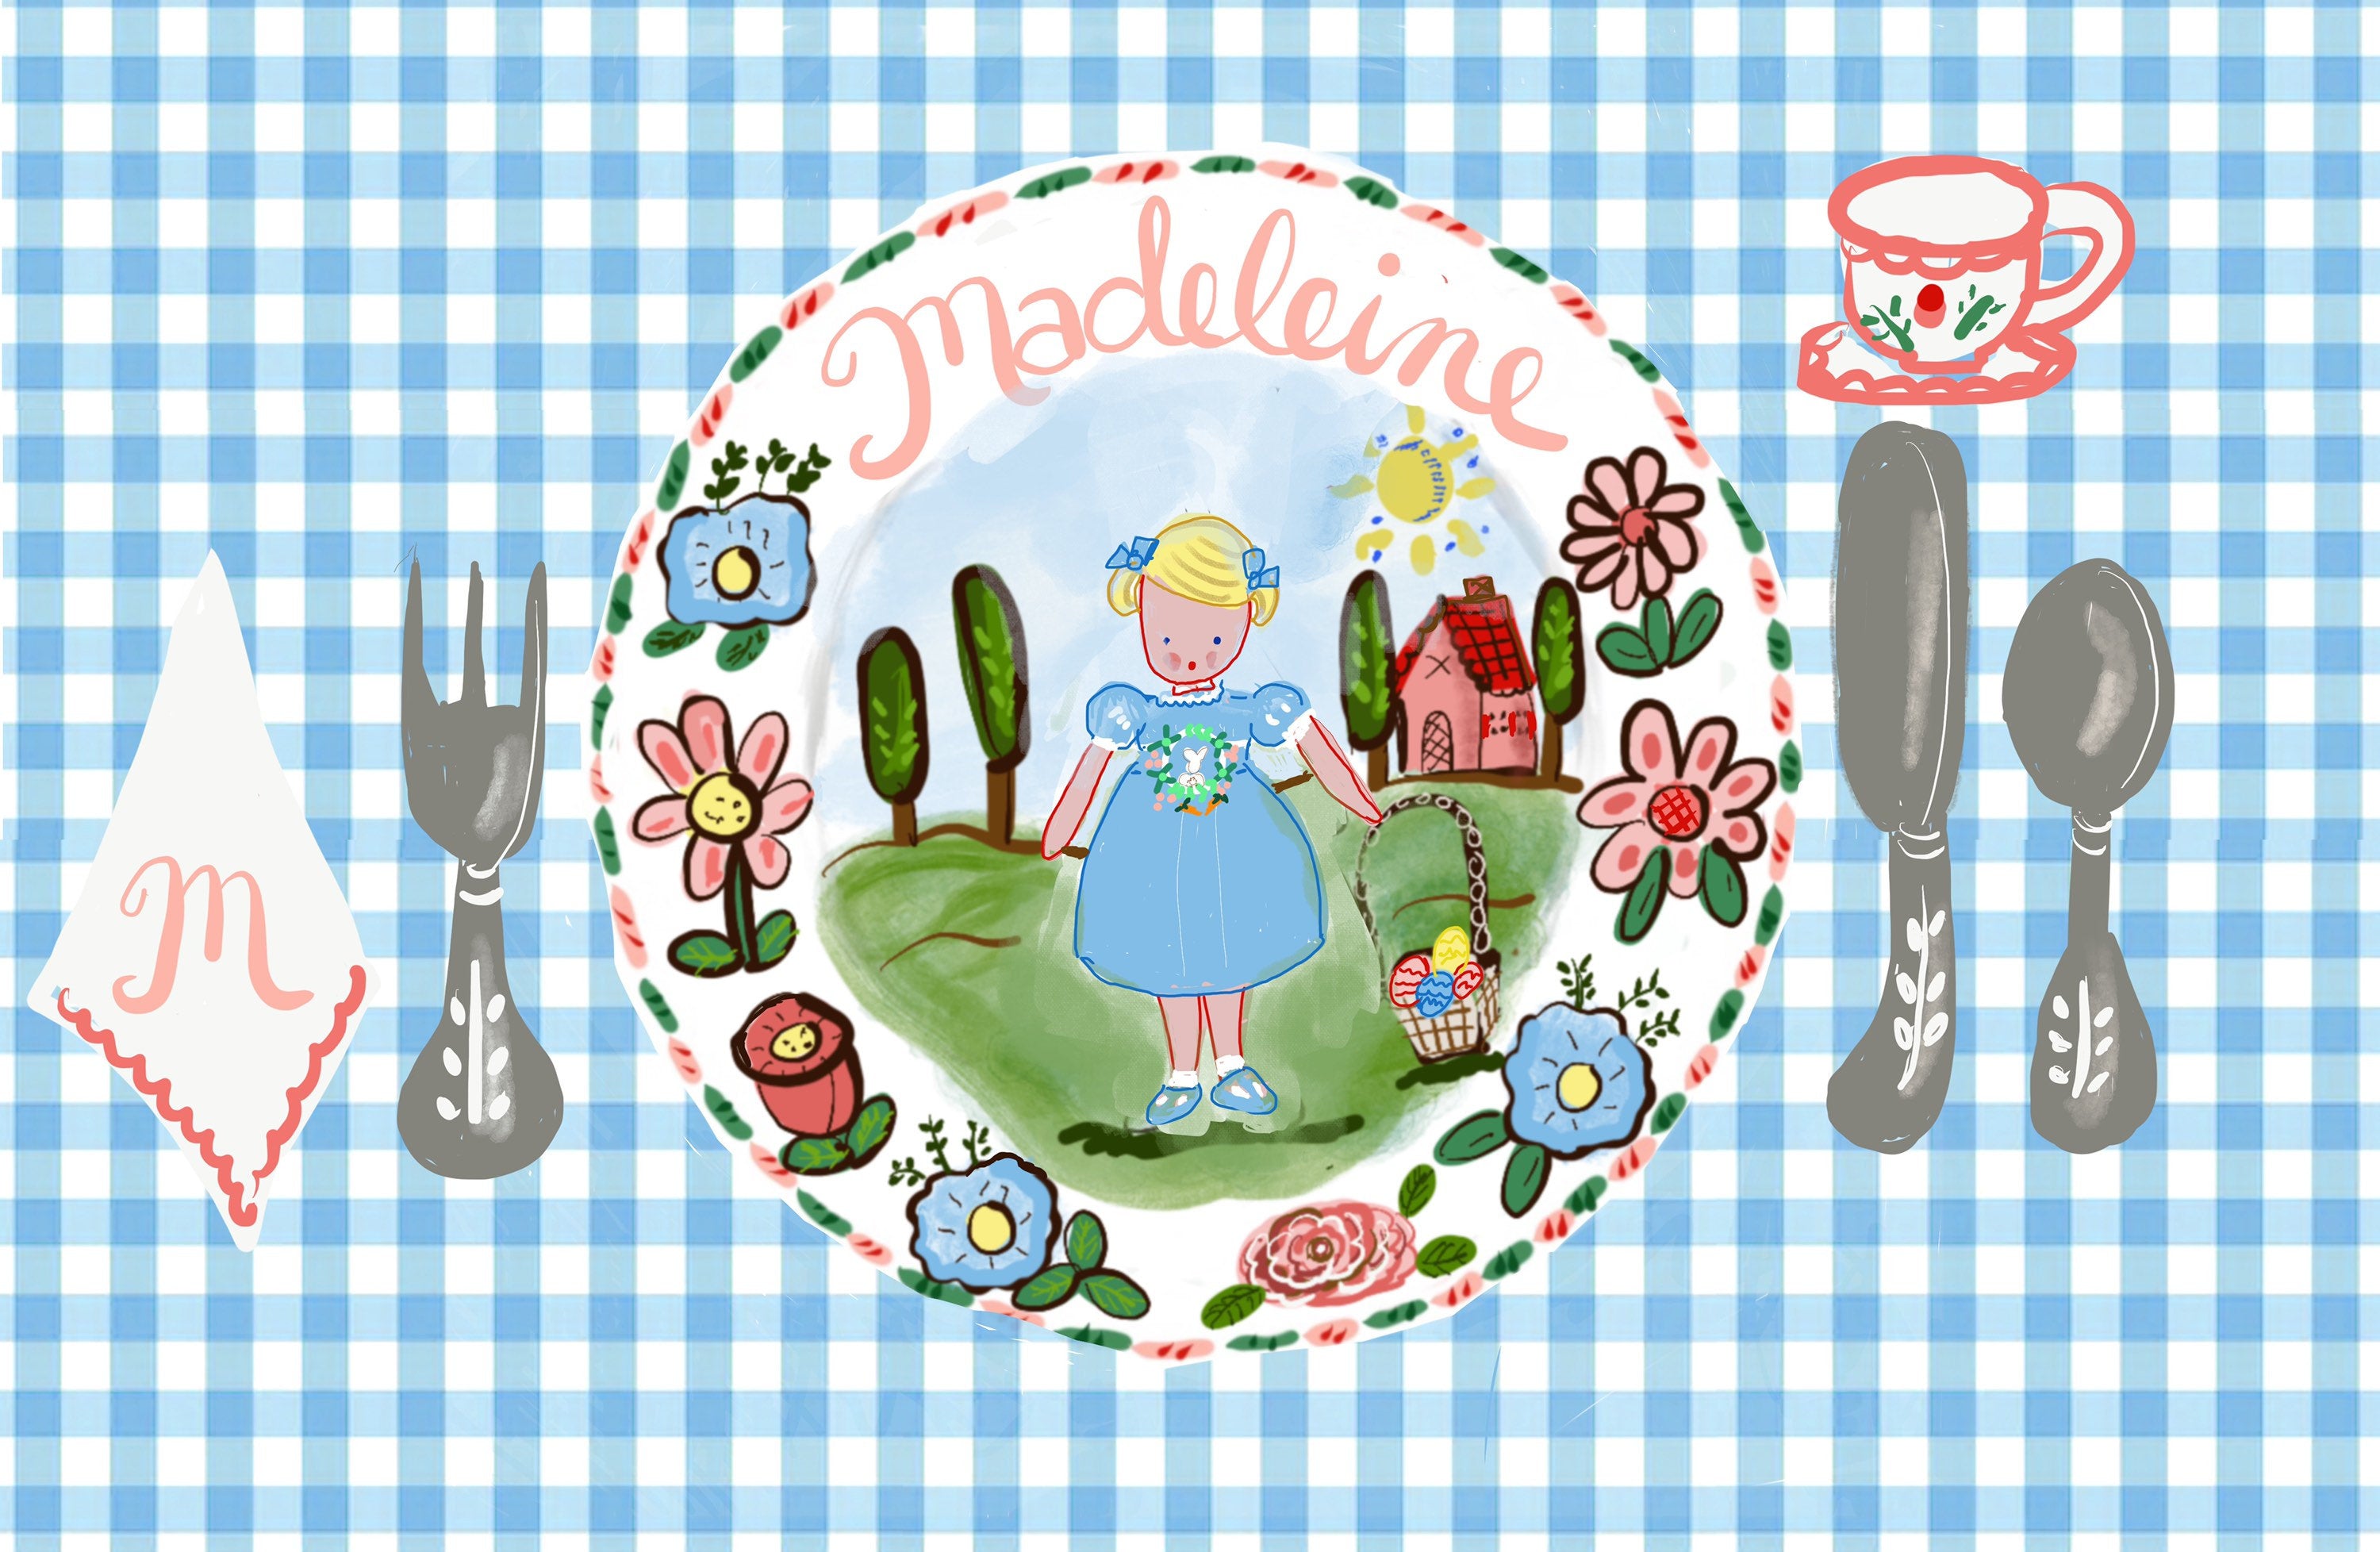 Laminated Placemat - Clover Bunny Girl - Tricia Lowenfield Design